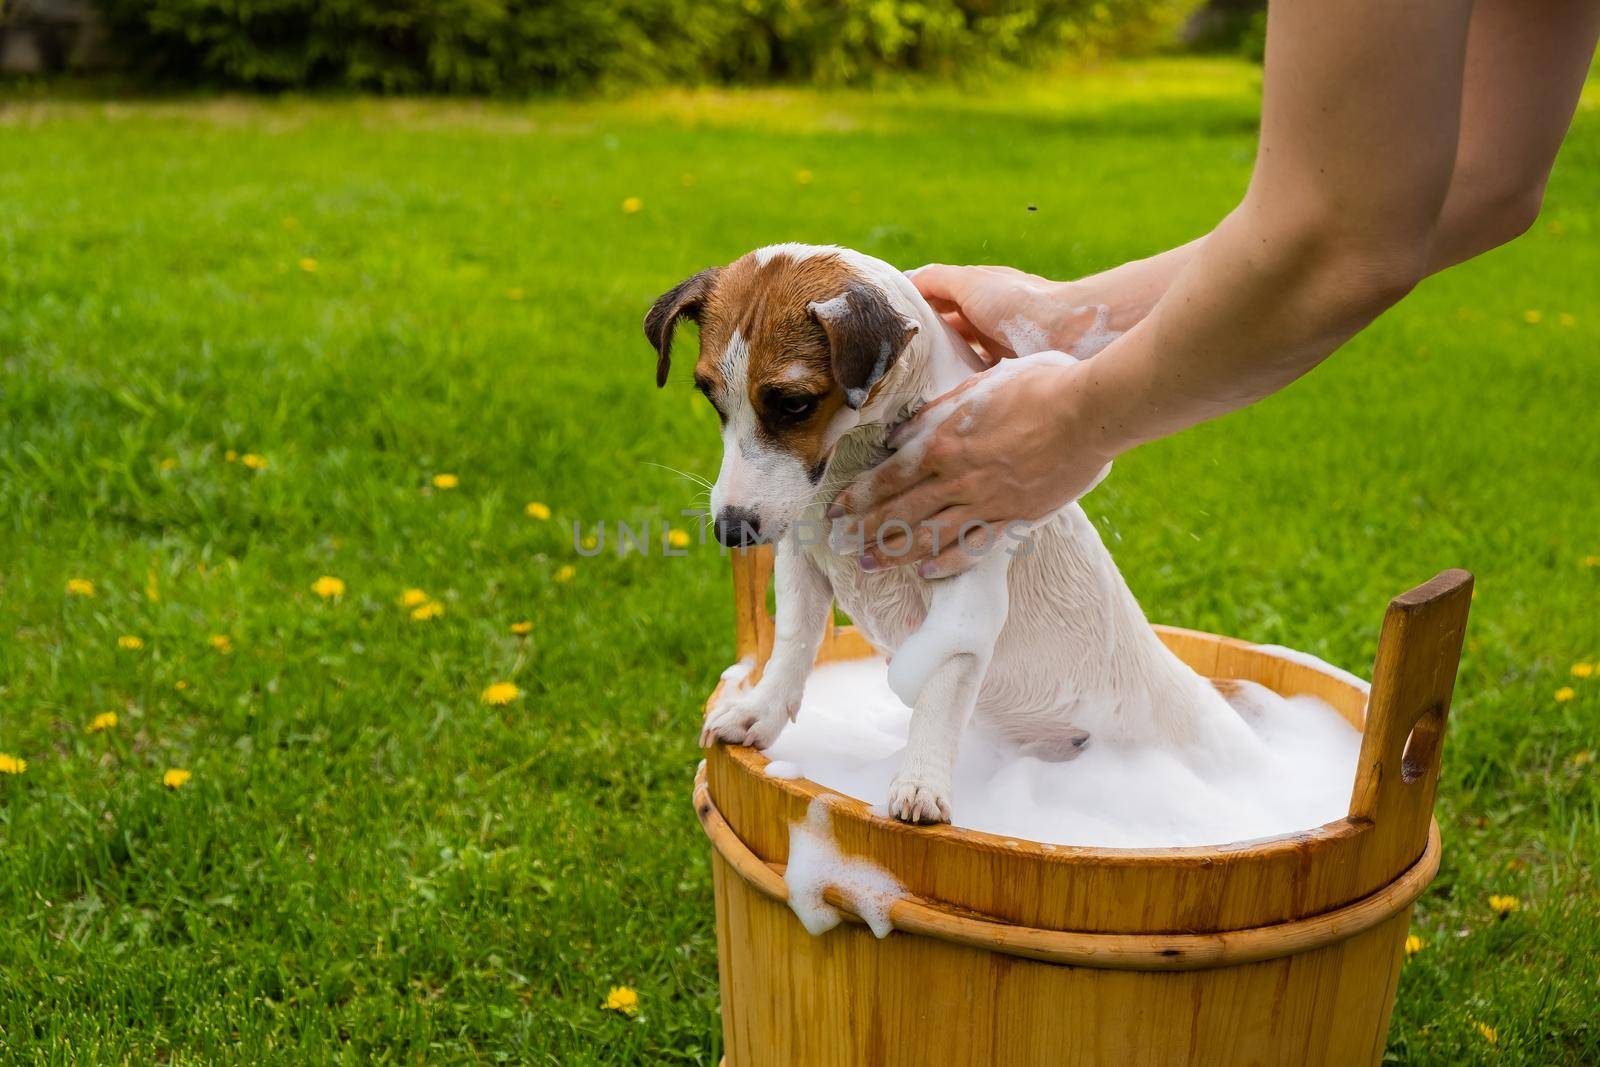 Woman washes her dog Jack Russell Terrier in a wooden tub outdoors. The hostess helps the pet to take a bath